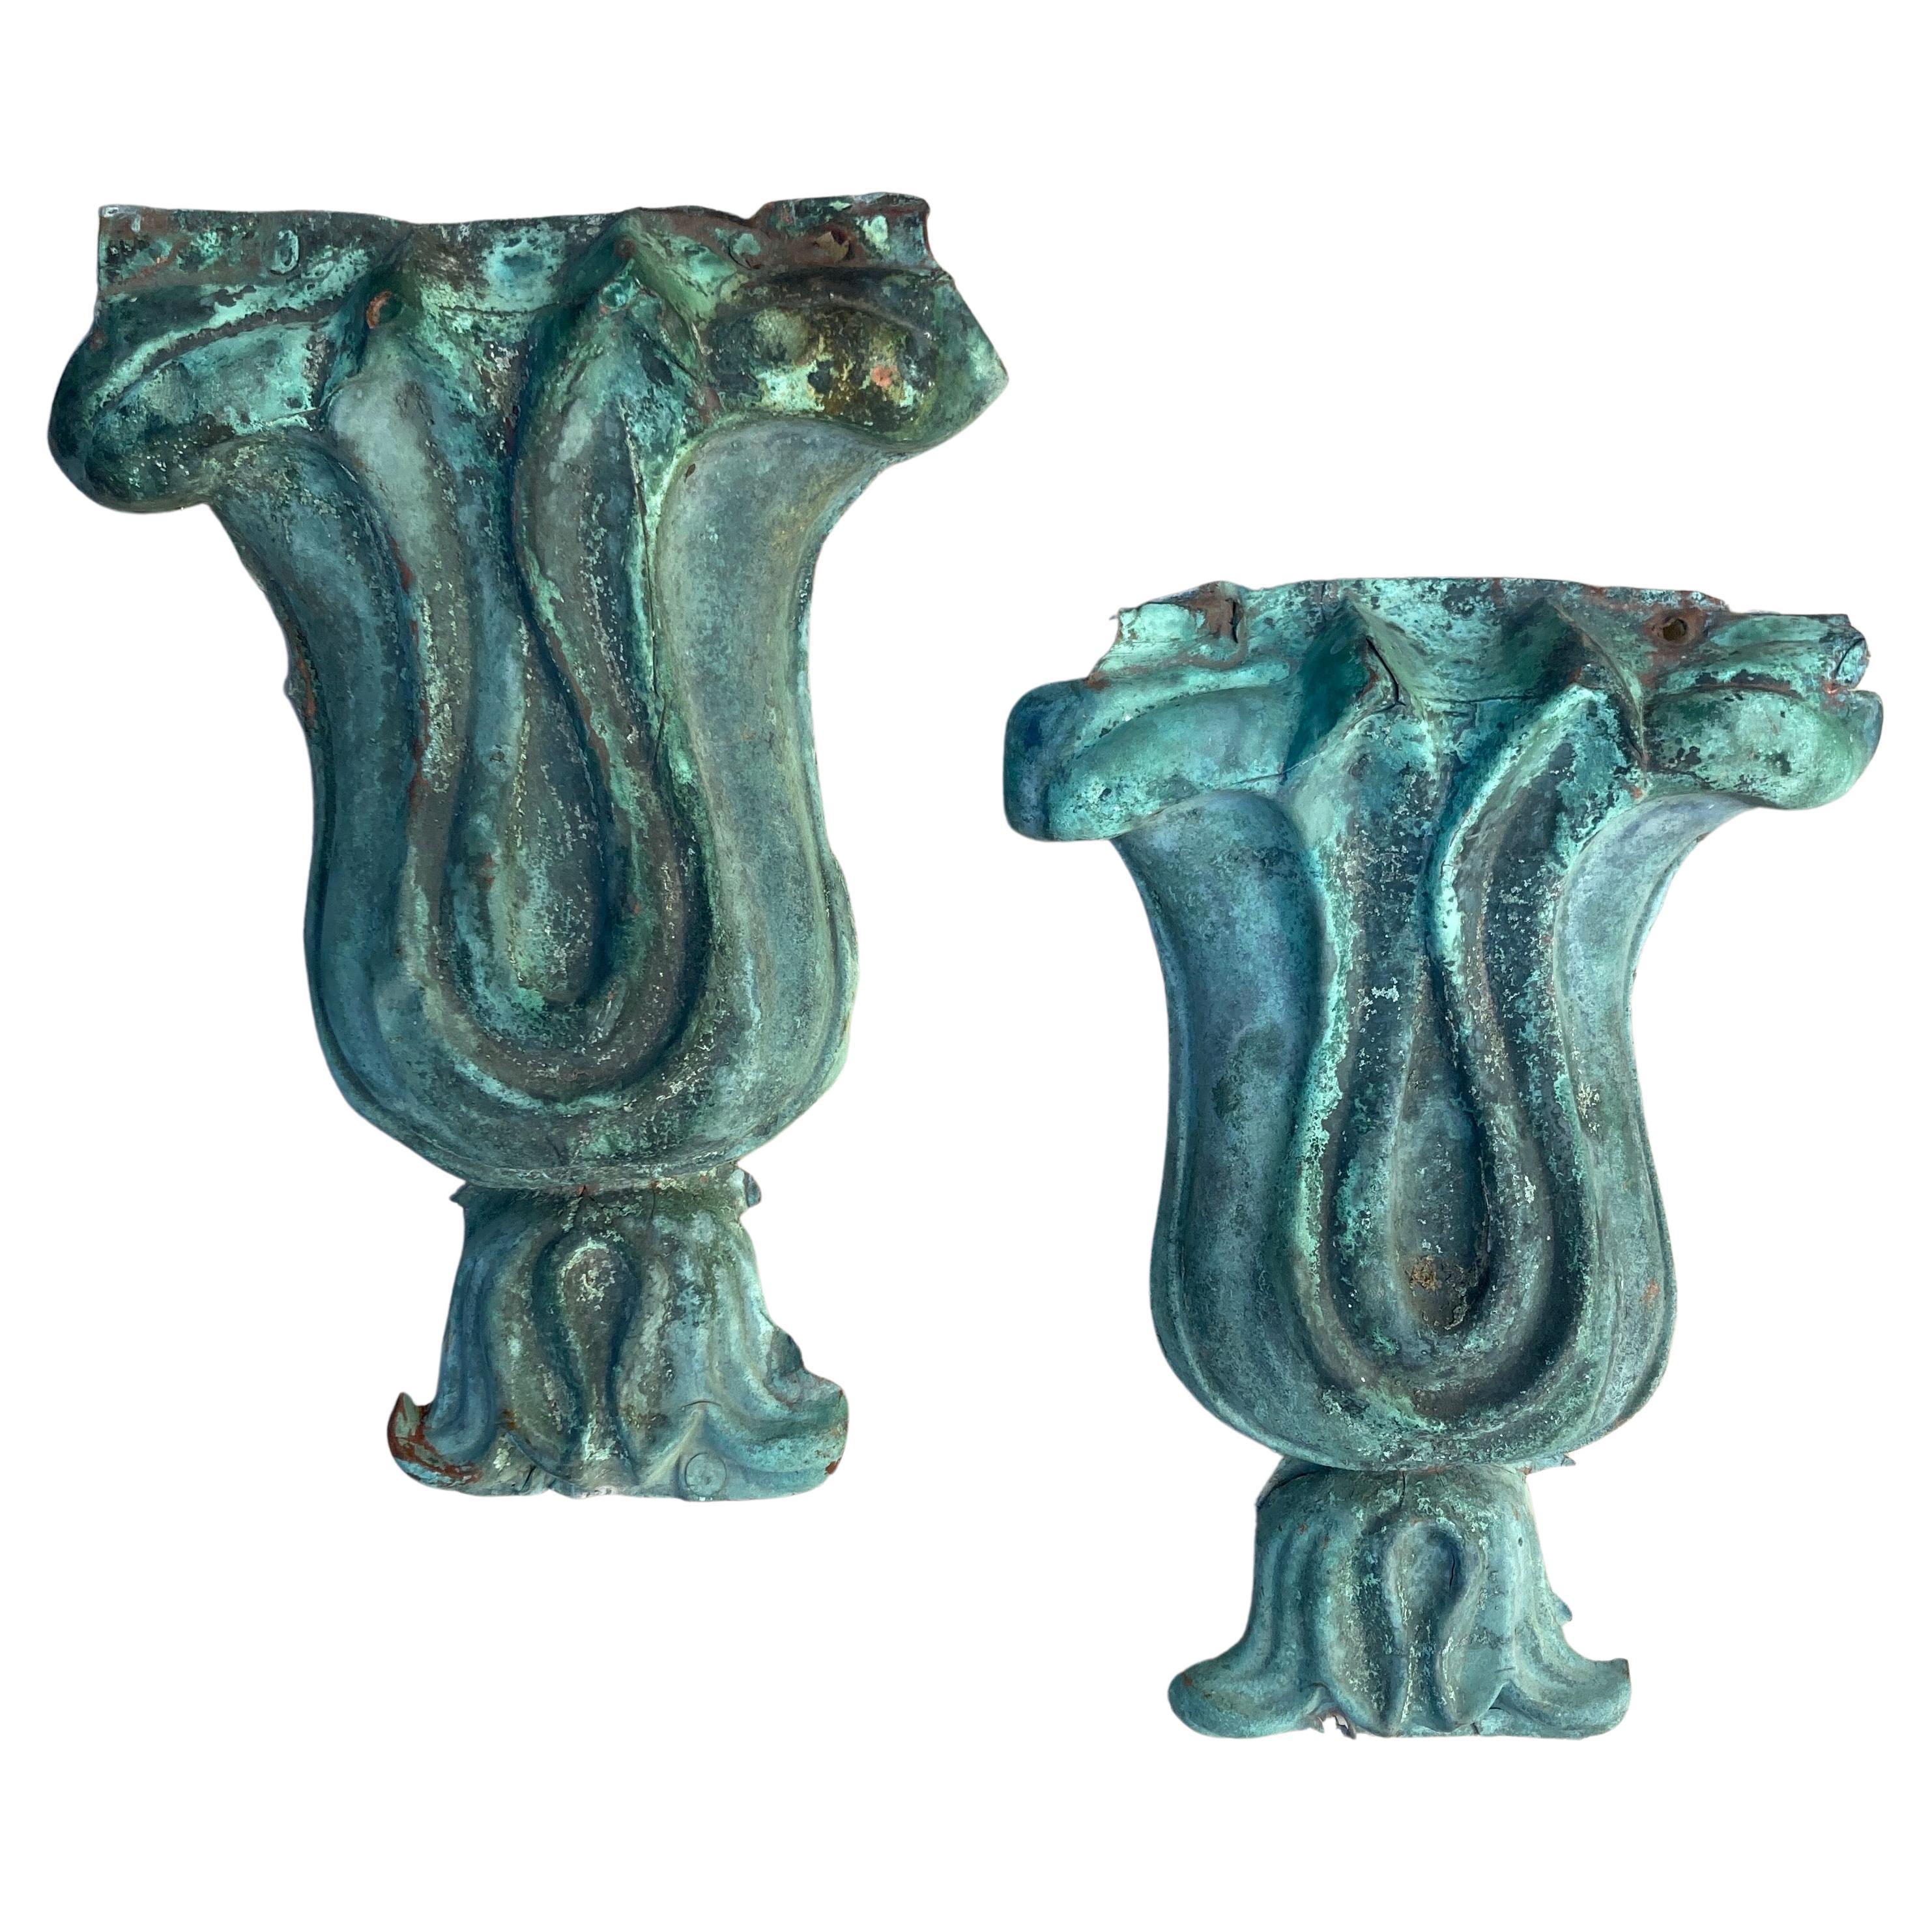 19th Century American Molded Verdigris Copper Urn Architectural Ornaments Pair For Sale